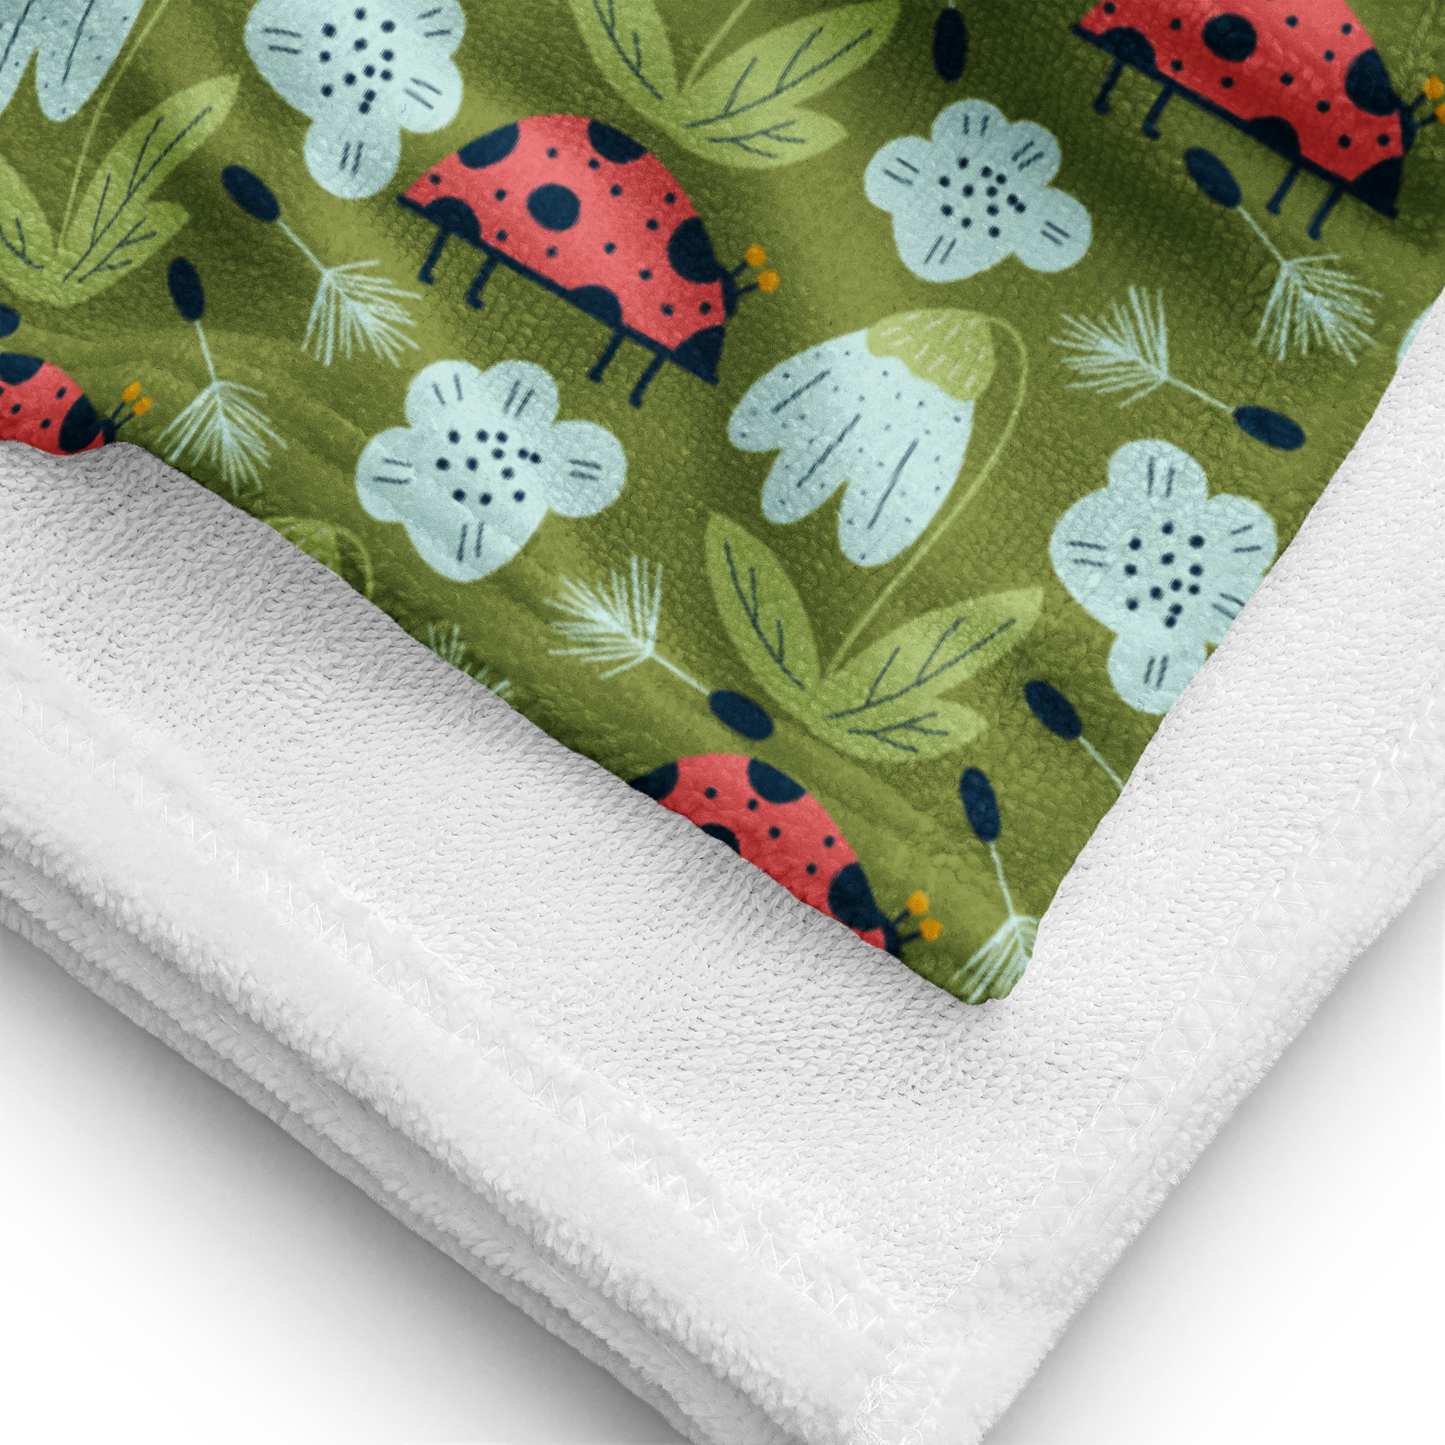 Scandinavian Spring Floral | Seamless Patterns | Sublimated Towel - #5